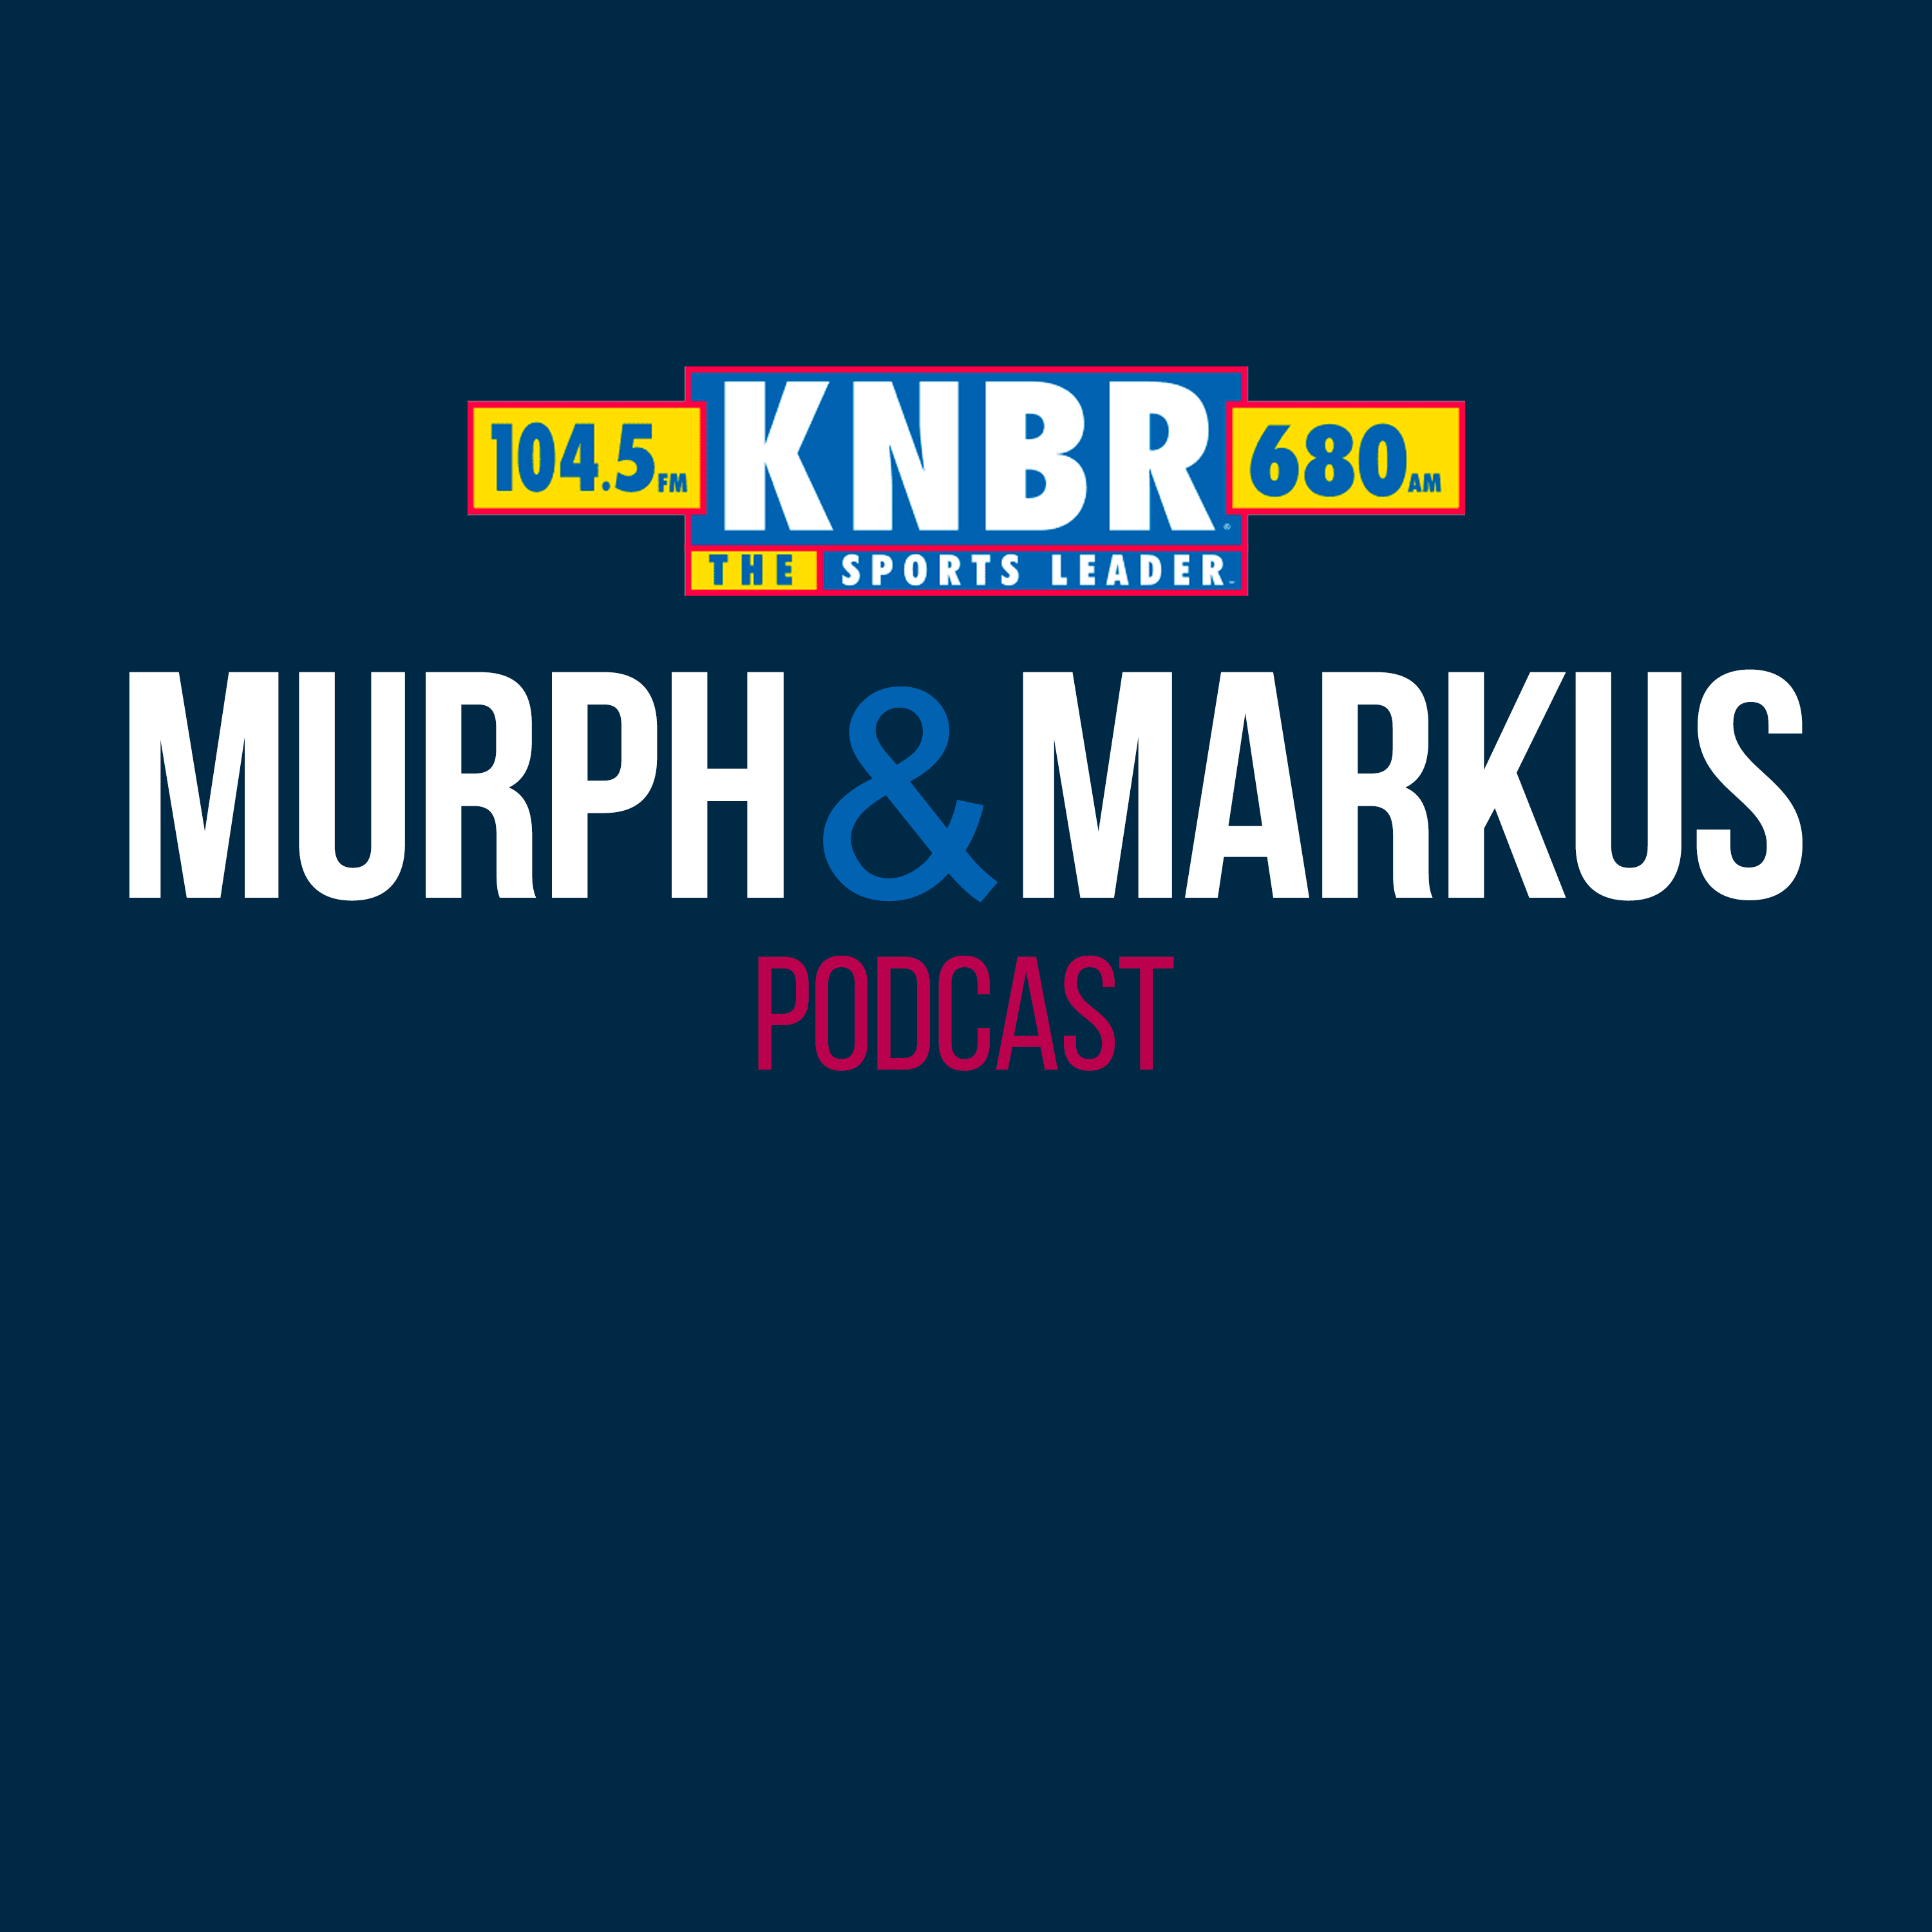 6-26 Hour 1: Murph & Markus react to the Giants two-game win streak, discuss the latest news regarding Brandon Aiyuk, and share their thoughts on Hayden Birdsong being called up for his MLB debut